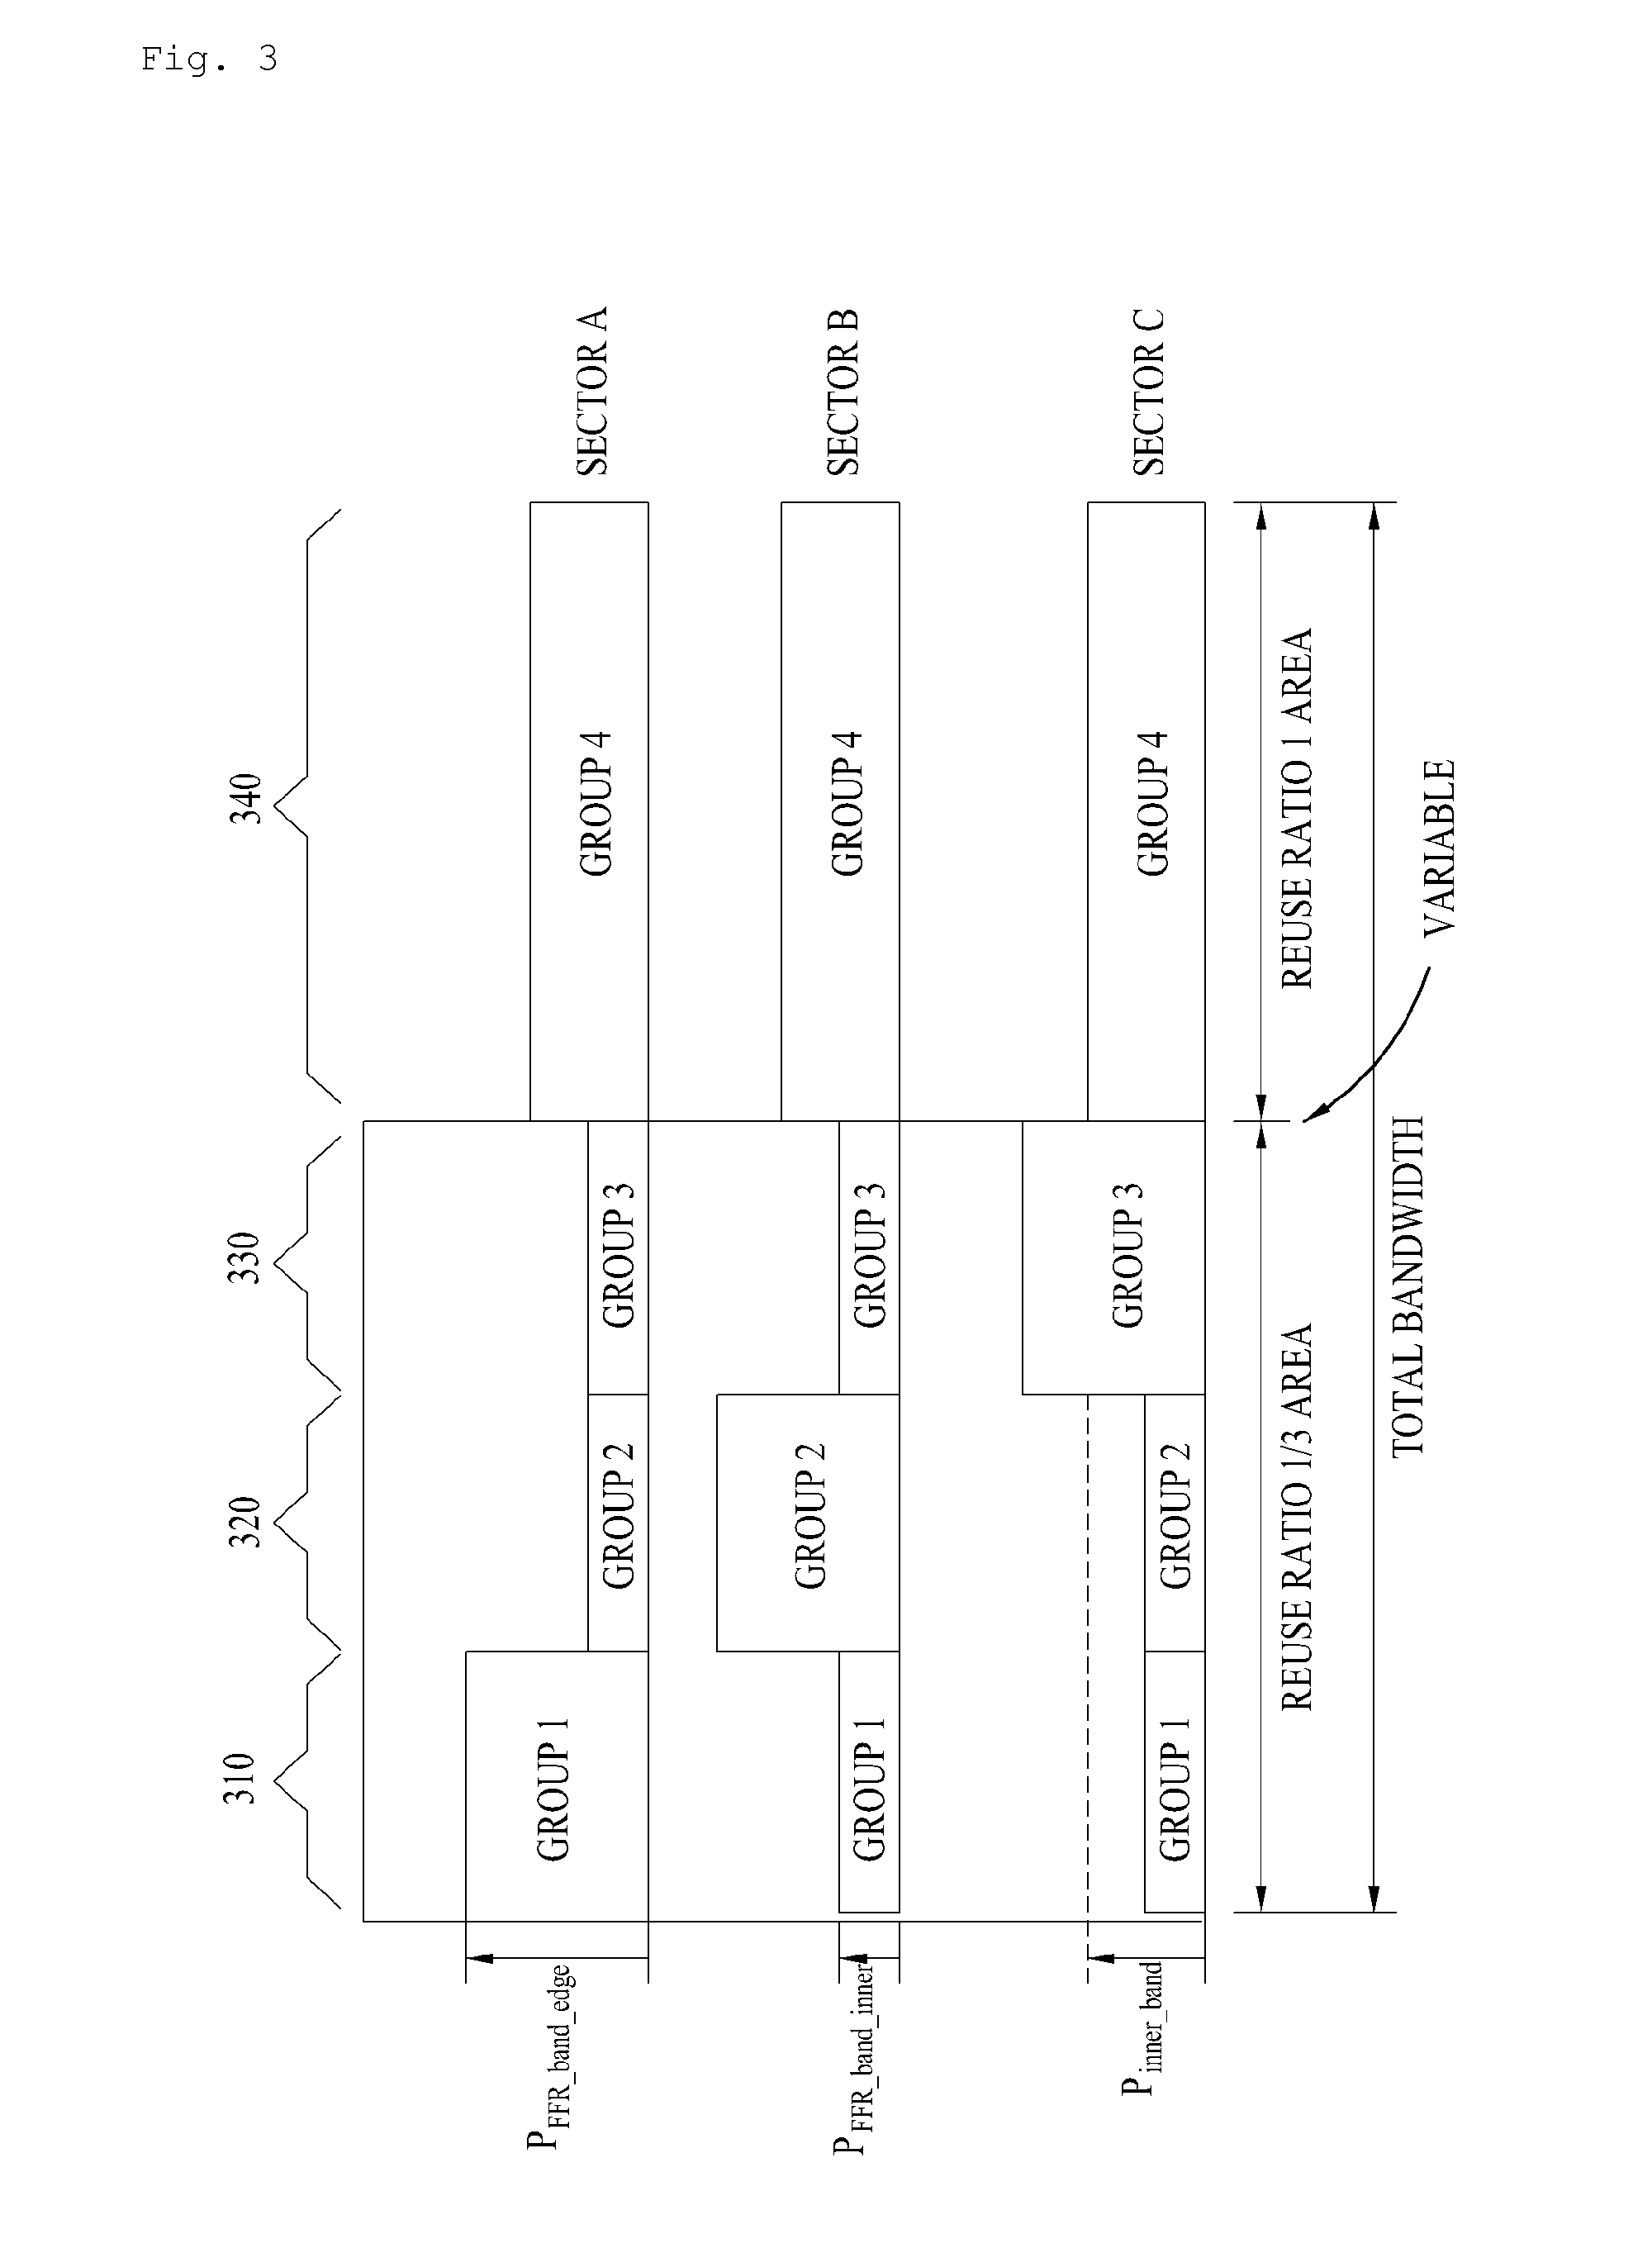 Method for providing control information associated with fractional frequency reuse